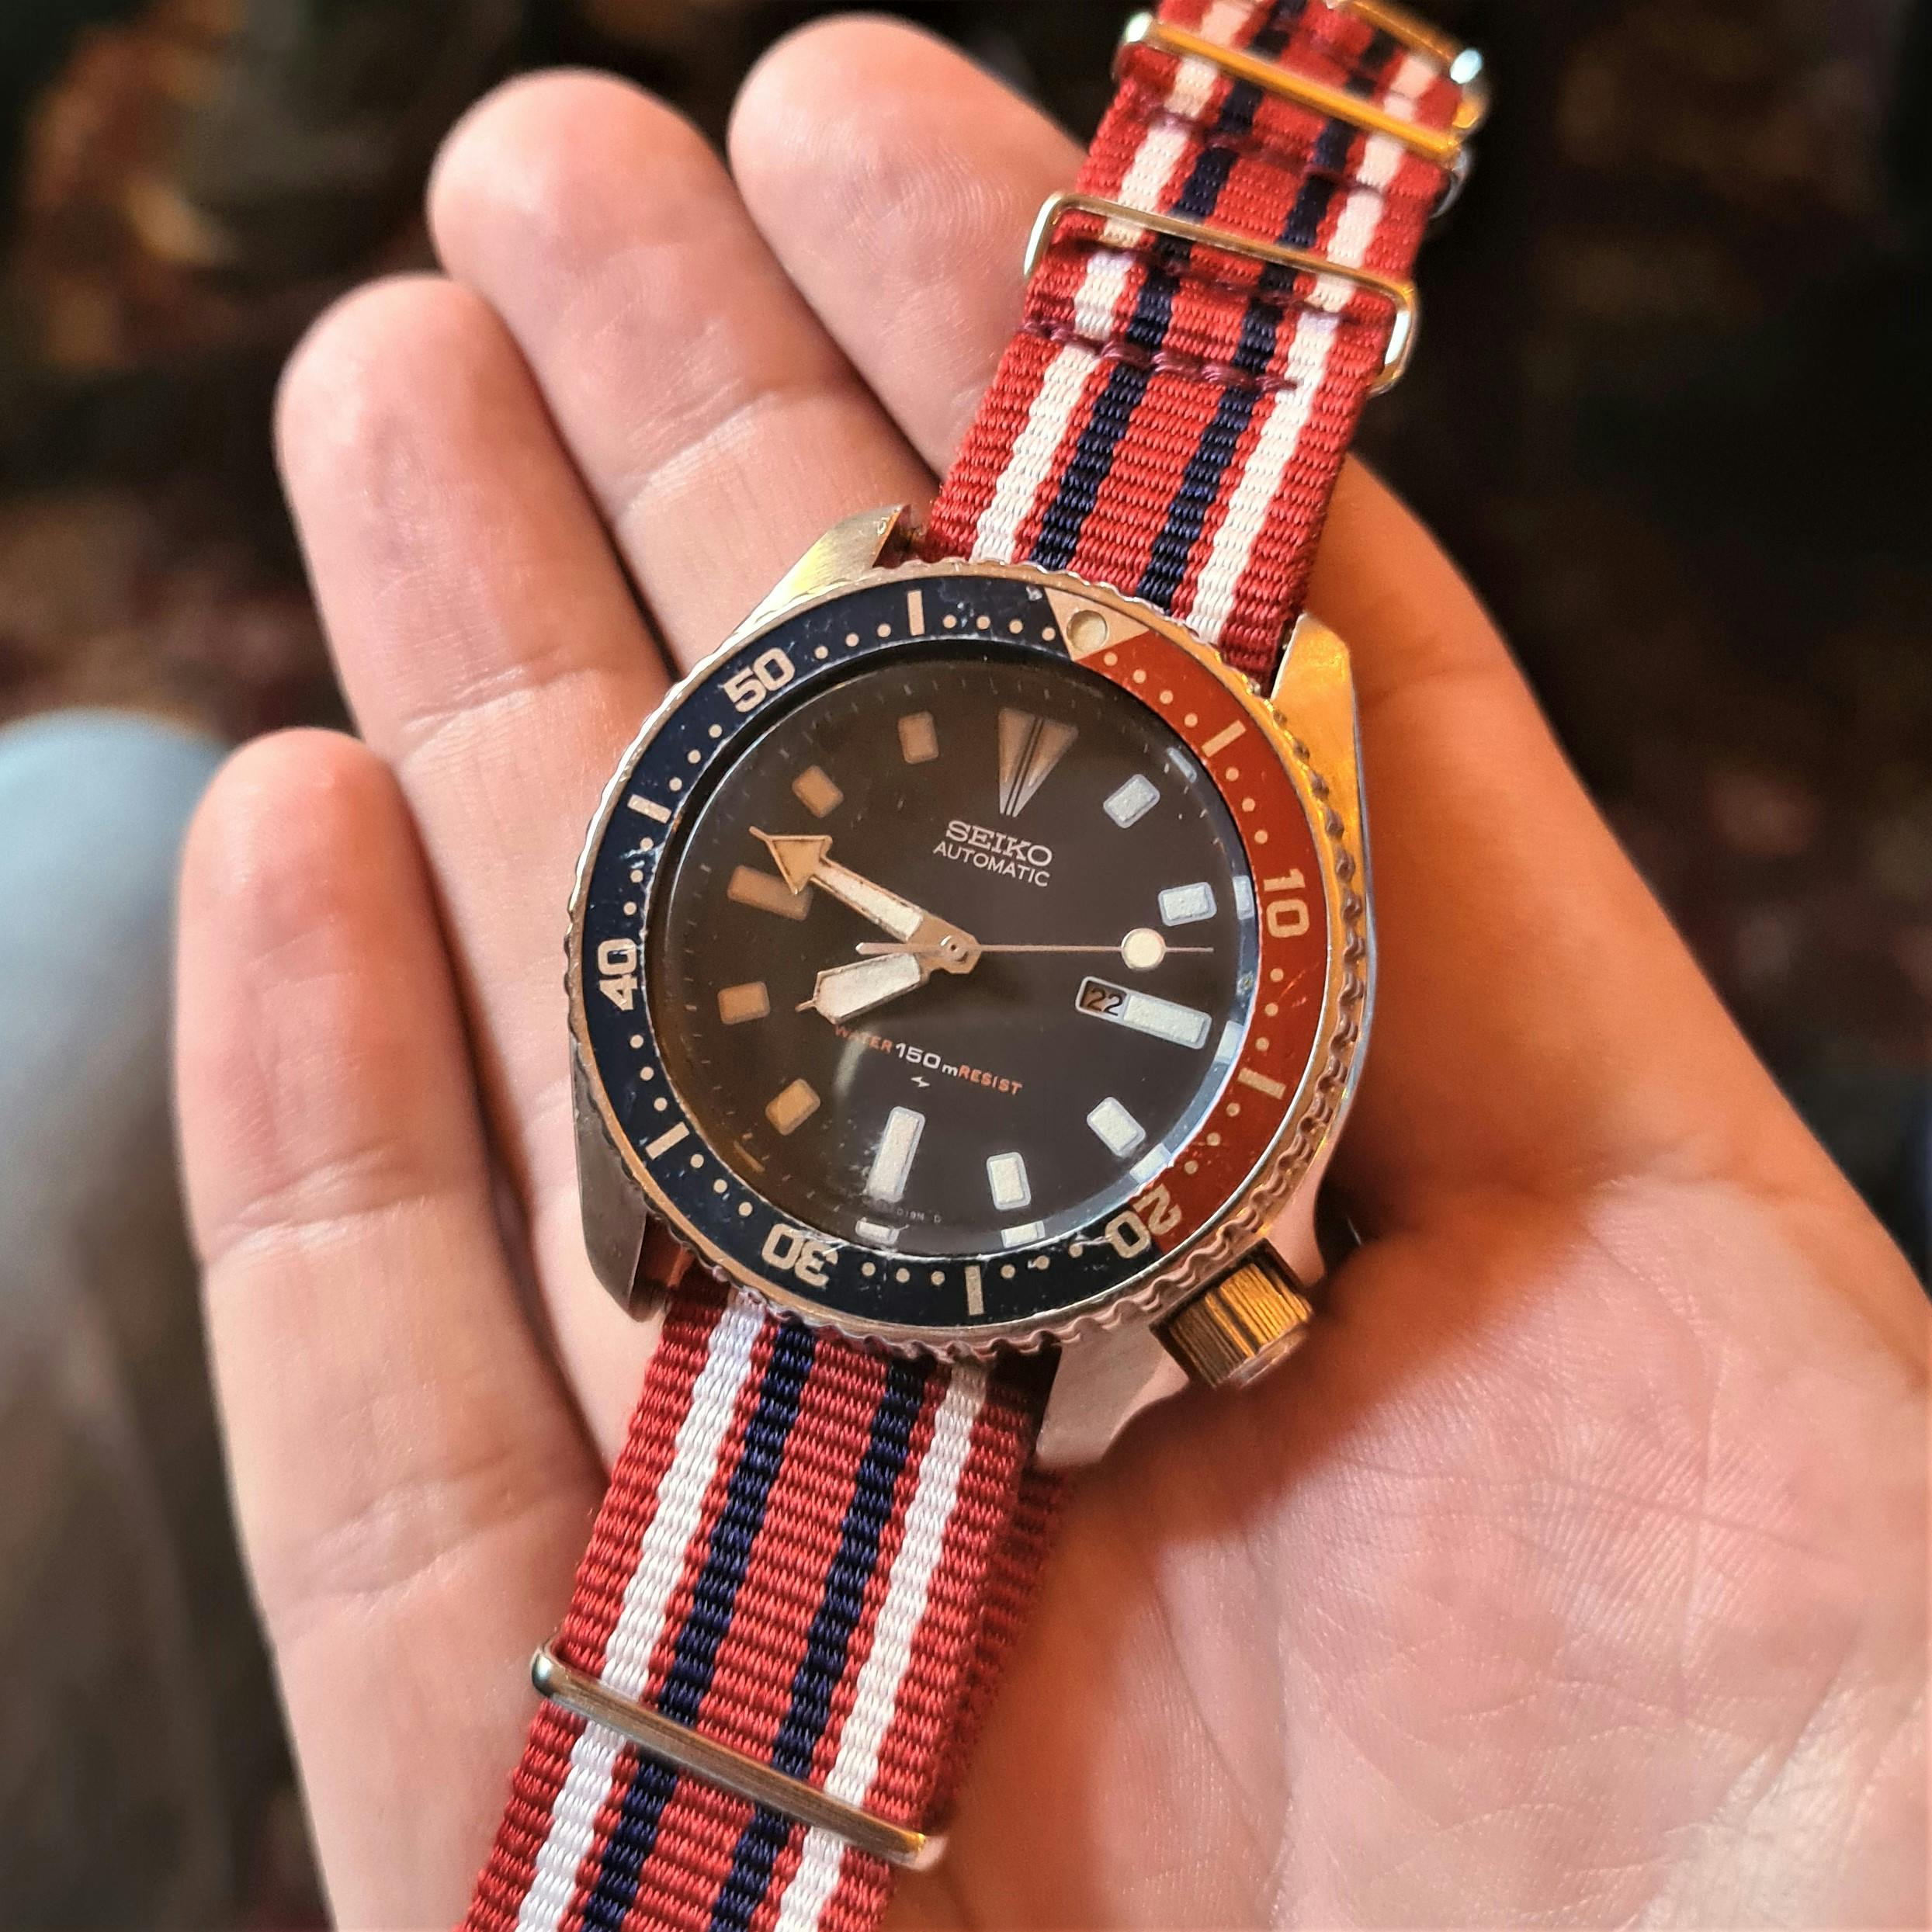 Colourful nato strap on a Seiko diving watch